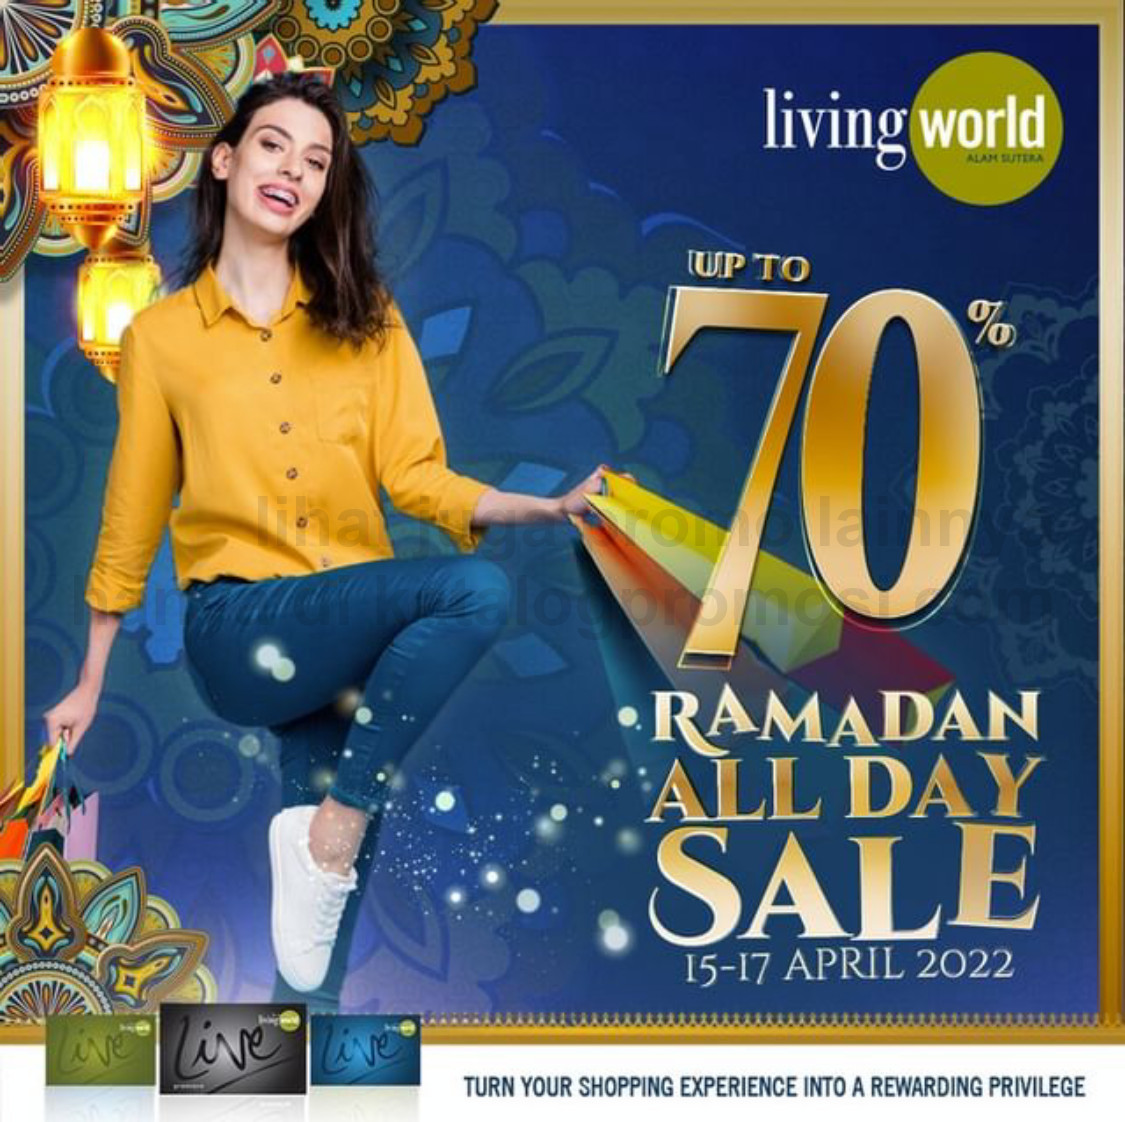 LIVING WORLD ALAM SUTERA RAMADAN ALL DAY SALE UP TO 70% off